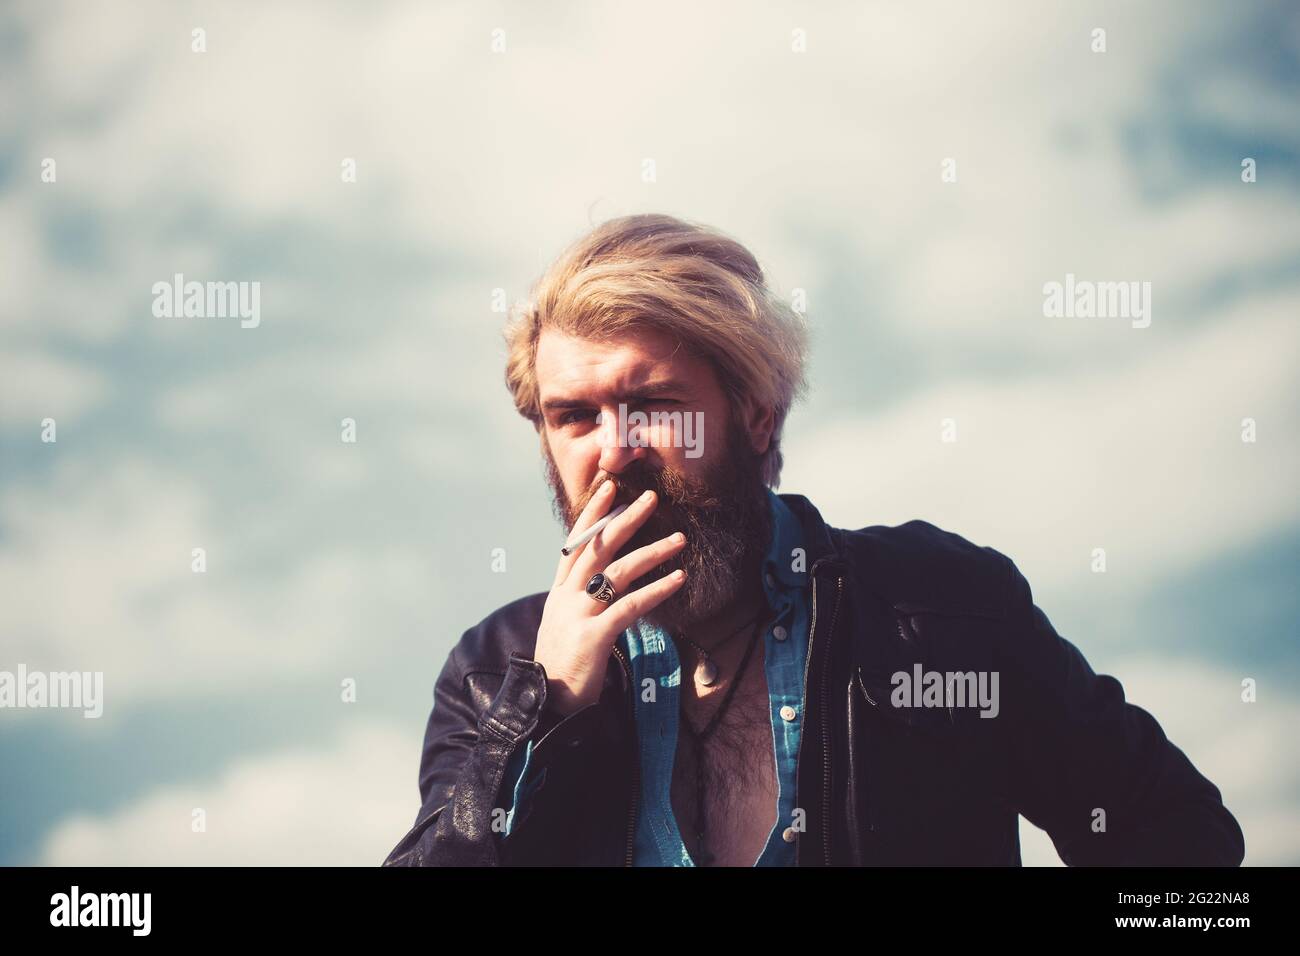 Trendy cool young man standing outside smoking cigarette. Against blue sky. Stock Photo